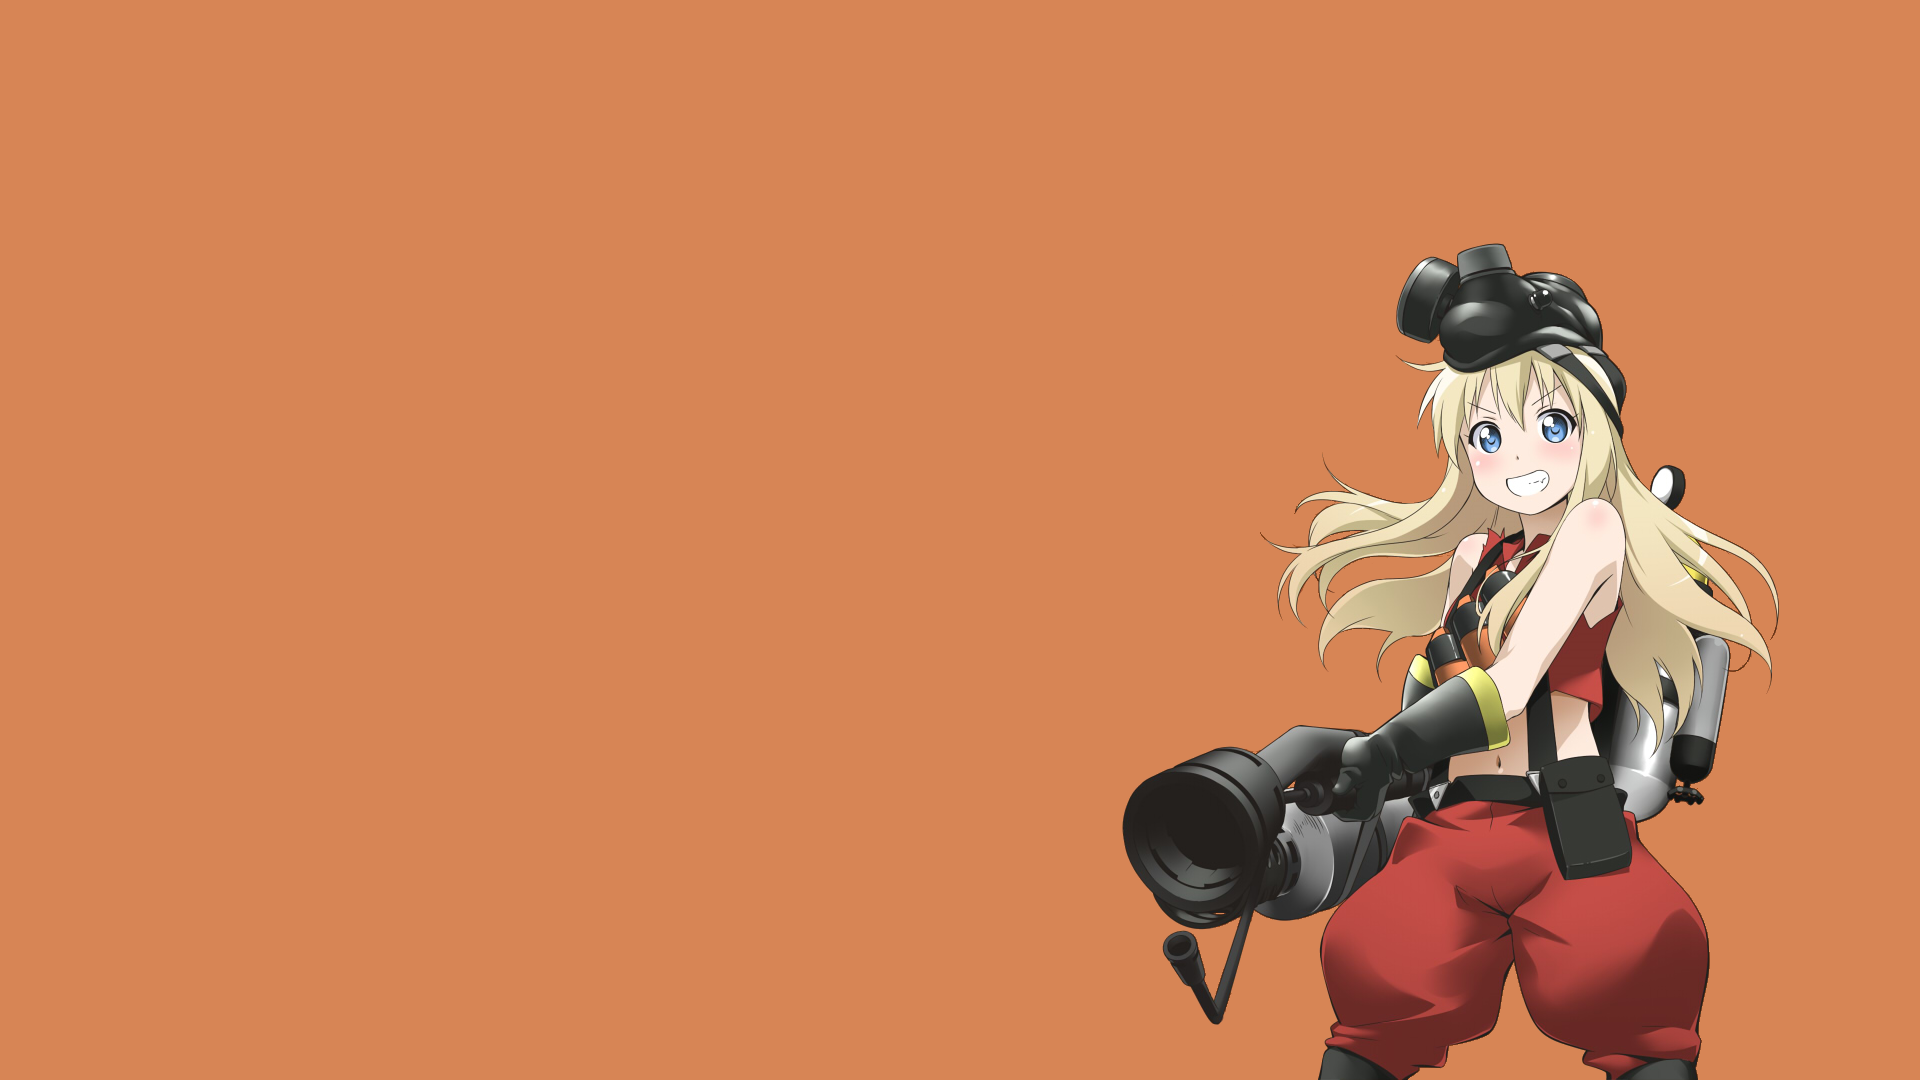 Anime 1920x1080 Team Fortress 2 Pyro (TF2) genderswap video game art video game girls anime girls anime weapon blue eyes simple background PC gaming blonde long hair